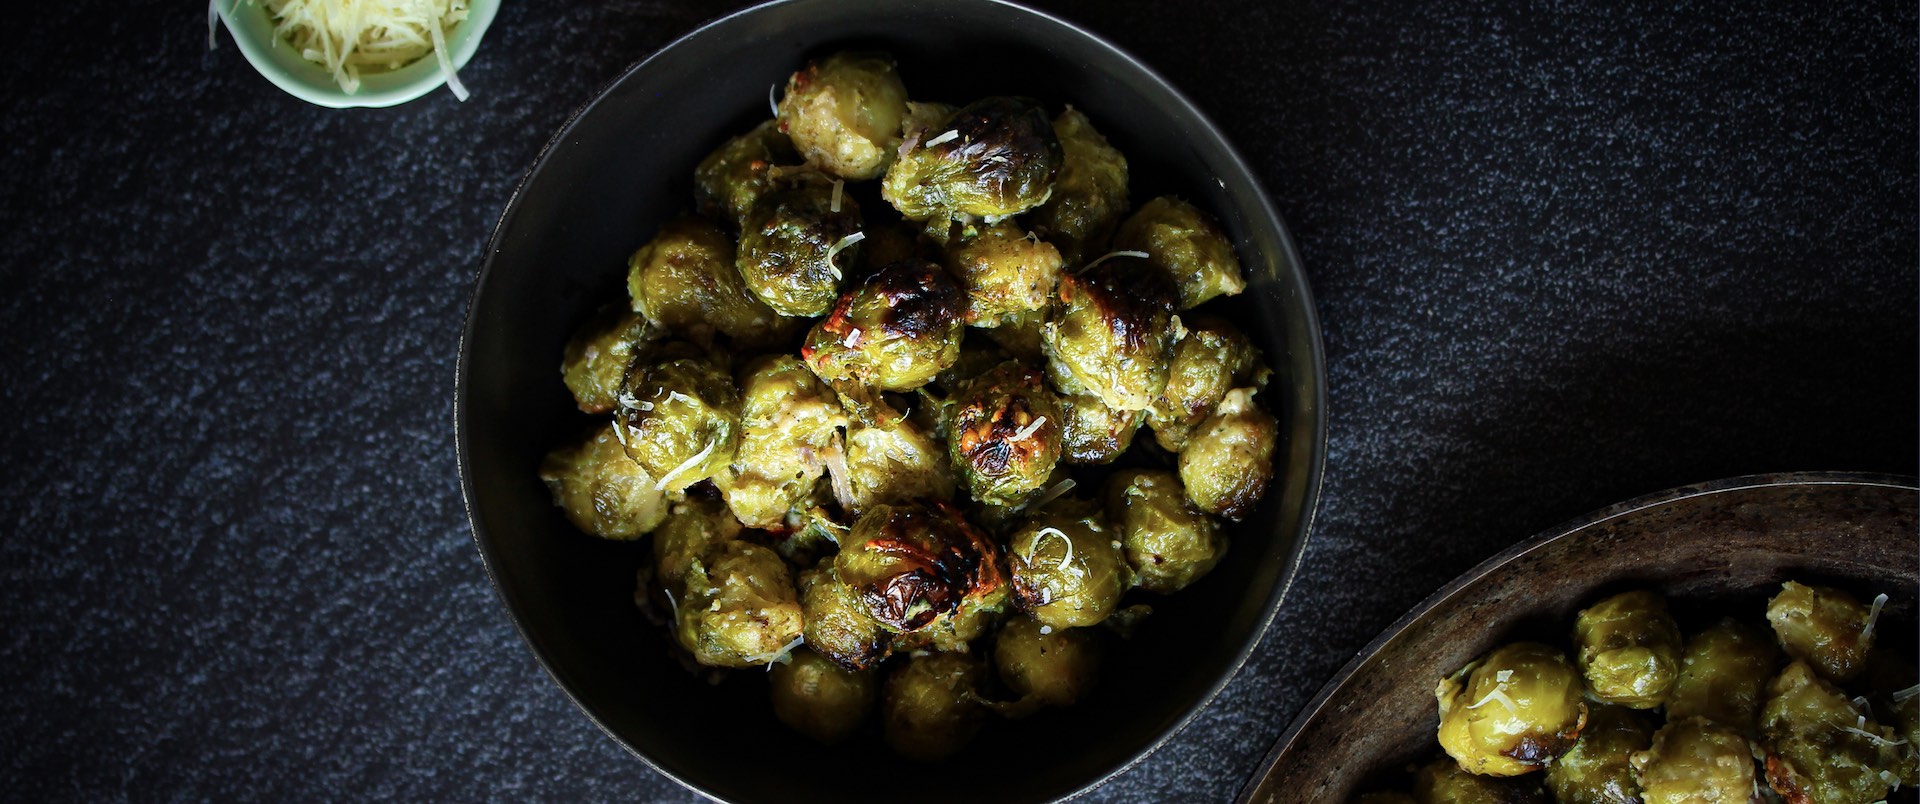 Creamy Baked Brussels Sprouts